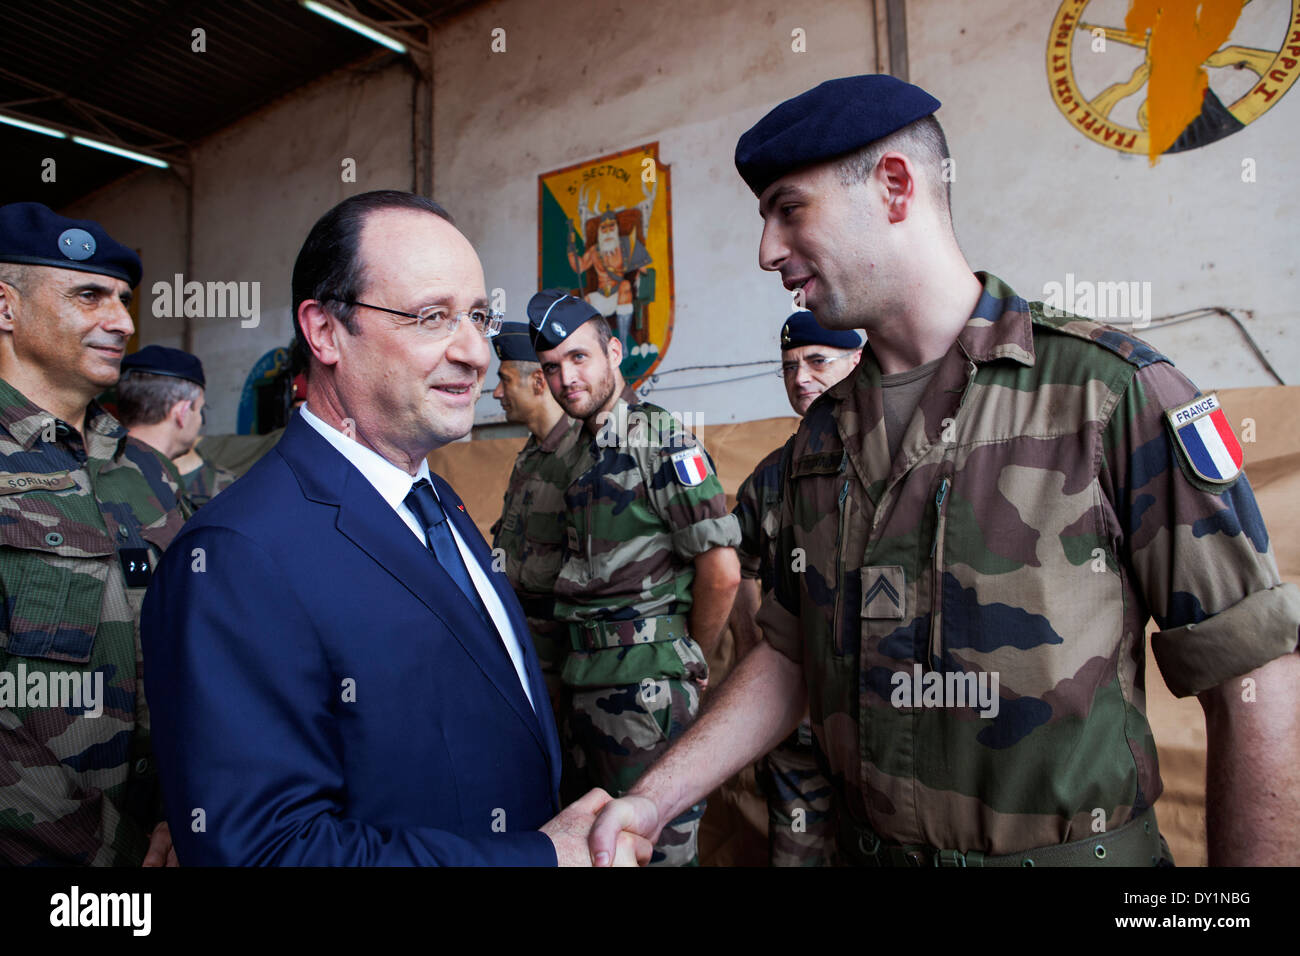 French President Hollande speaks and greets French troops at the Mpoko base in Bangui, Central African Republic Stock Photo